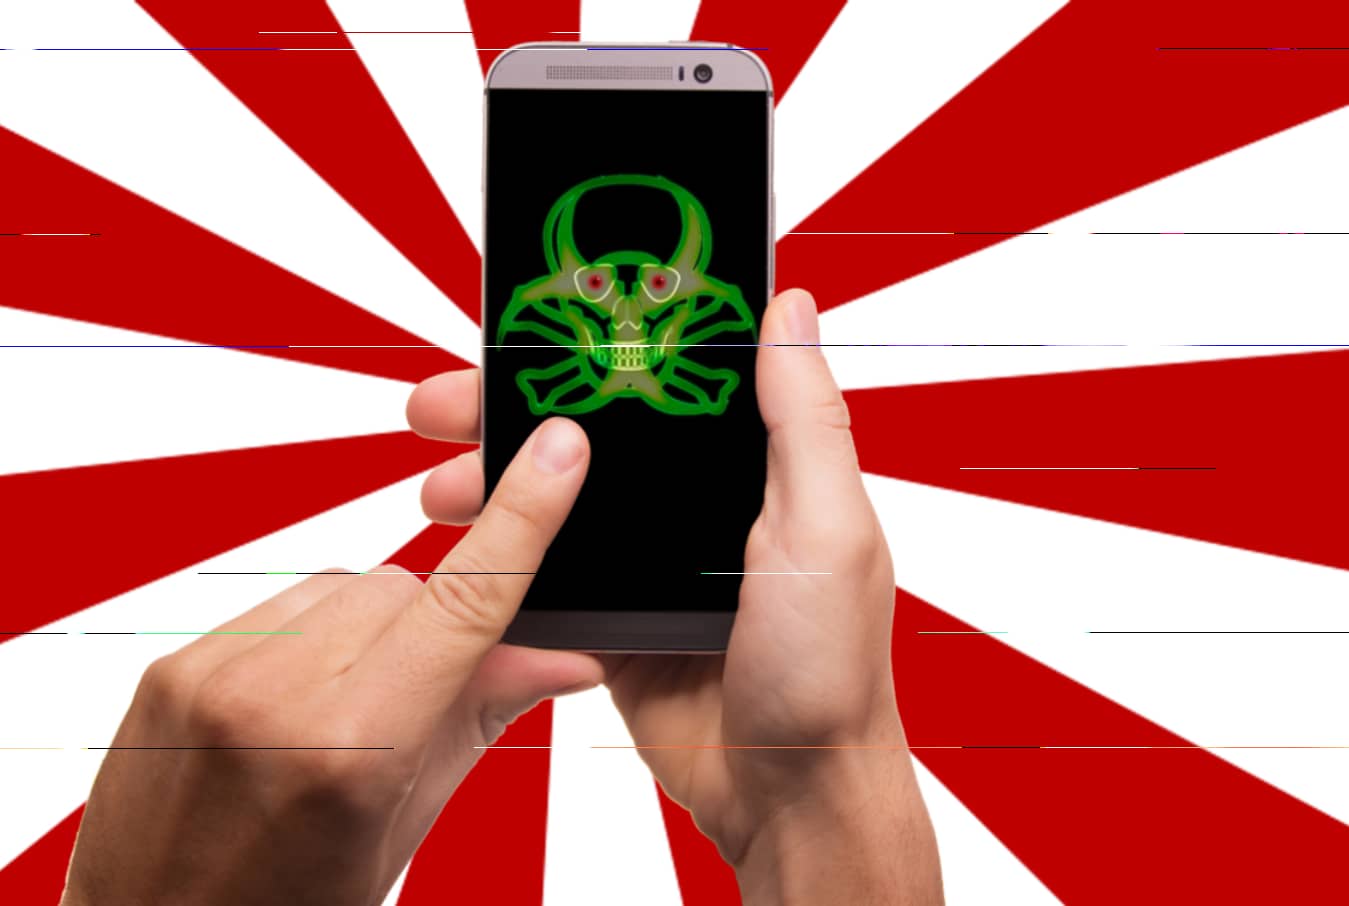 How to identify malware on your phone with these 7 signs